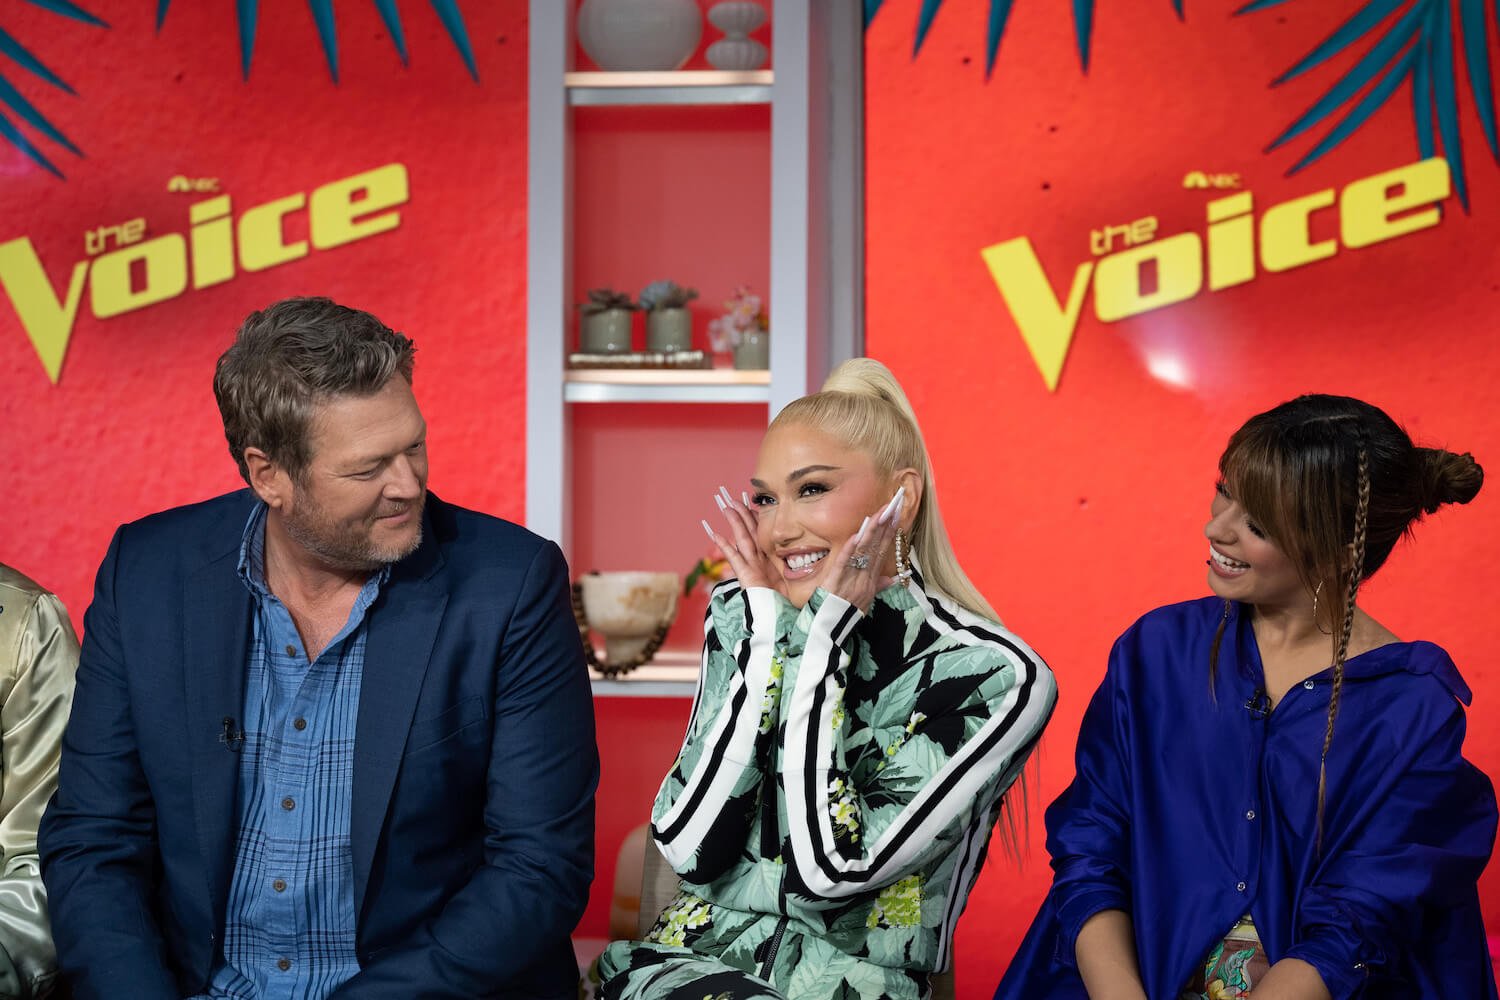 Gwen Stefani in front of 'The Voice' background with Blake Shelton on her right and Camila Cabello on her left